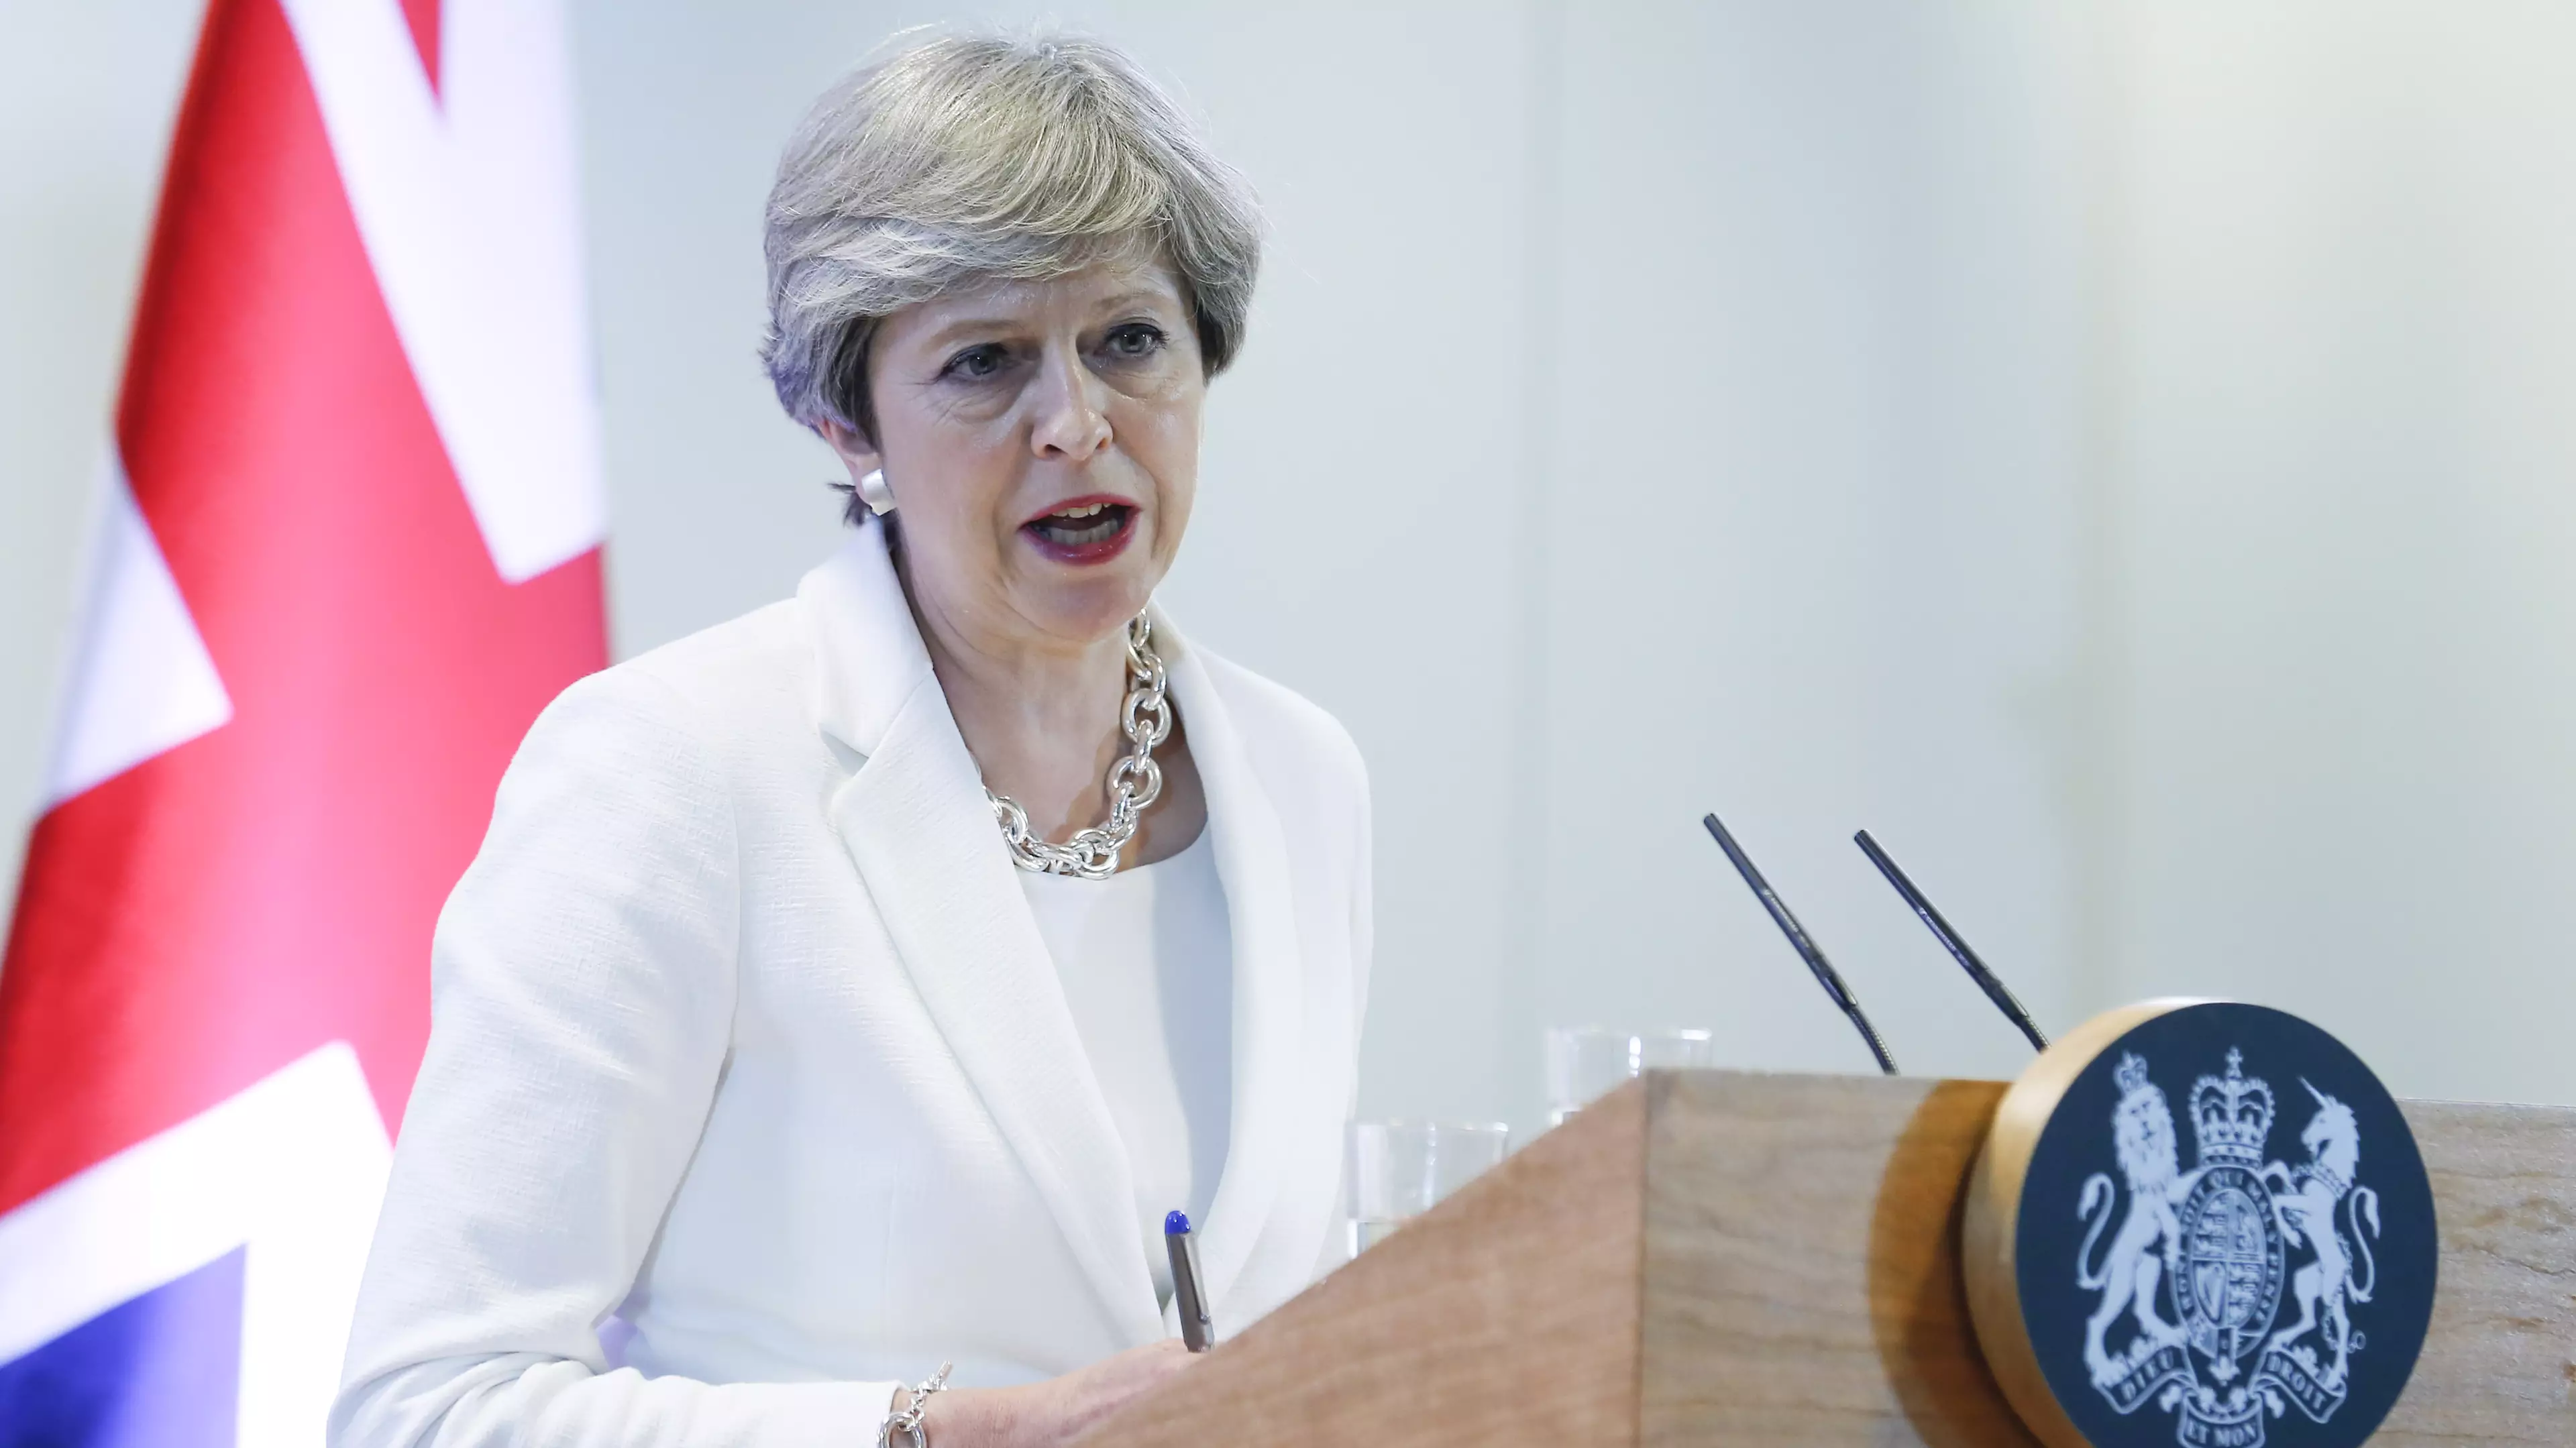 UK Prime Minister Theresa May attends a press conference in Brussels